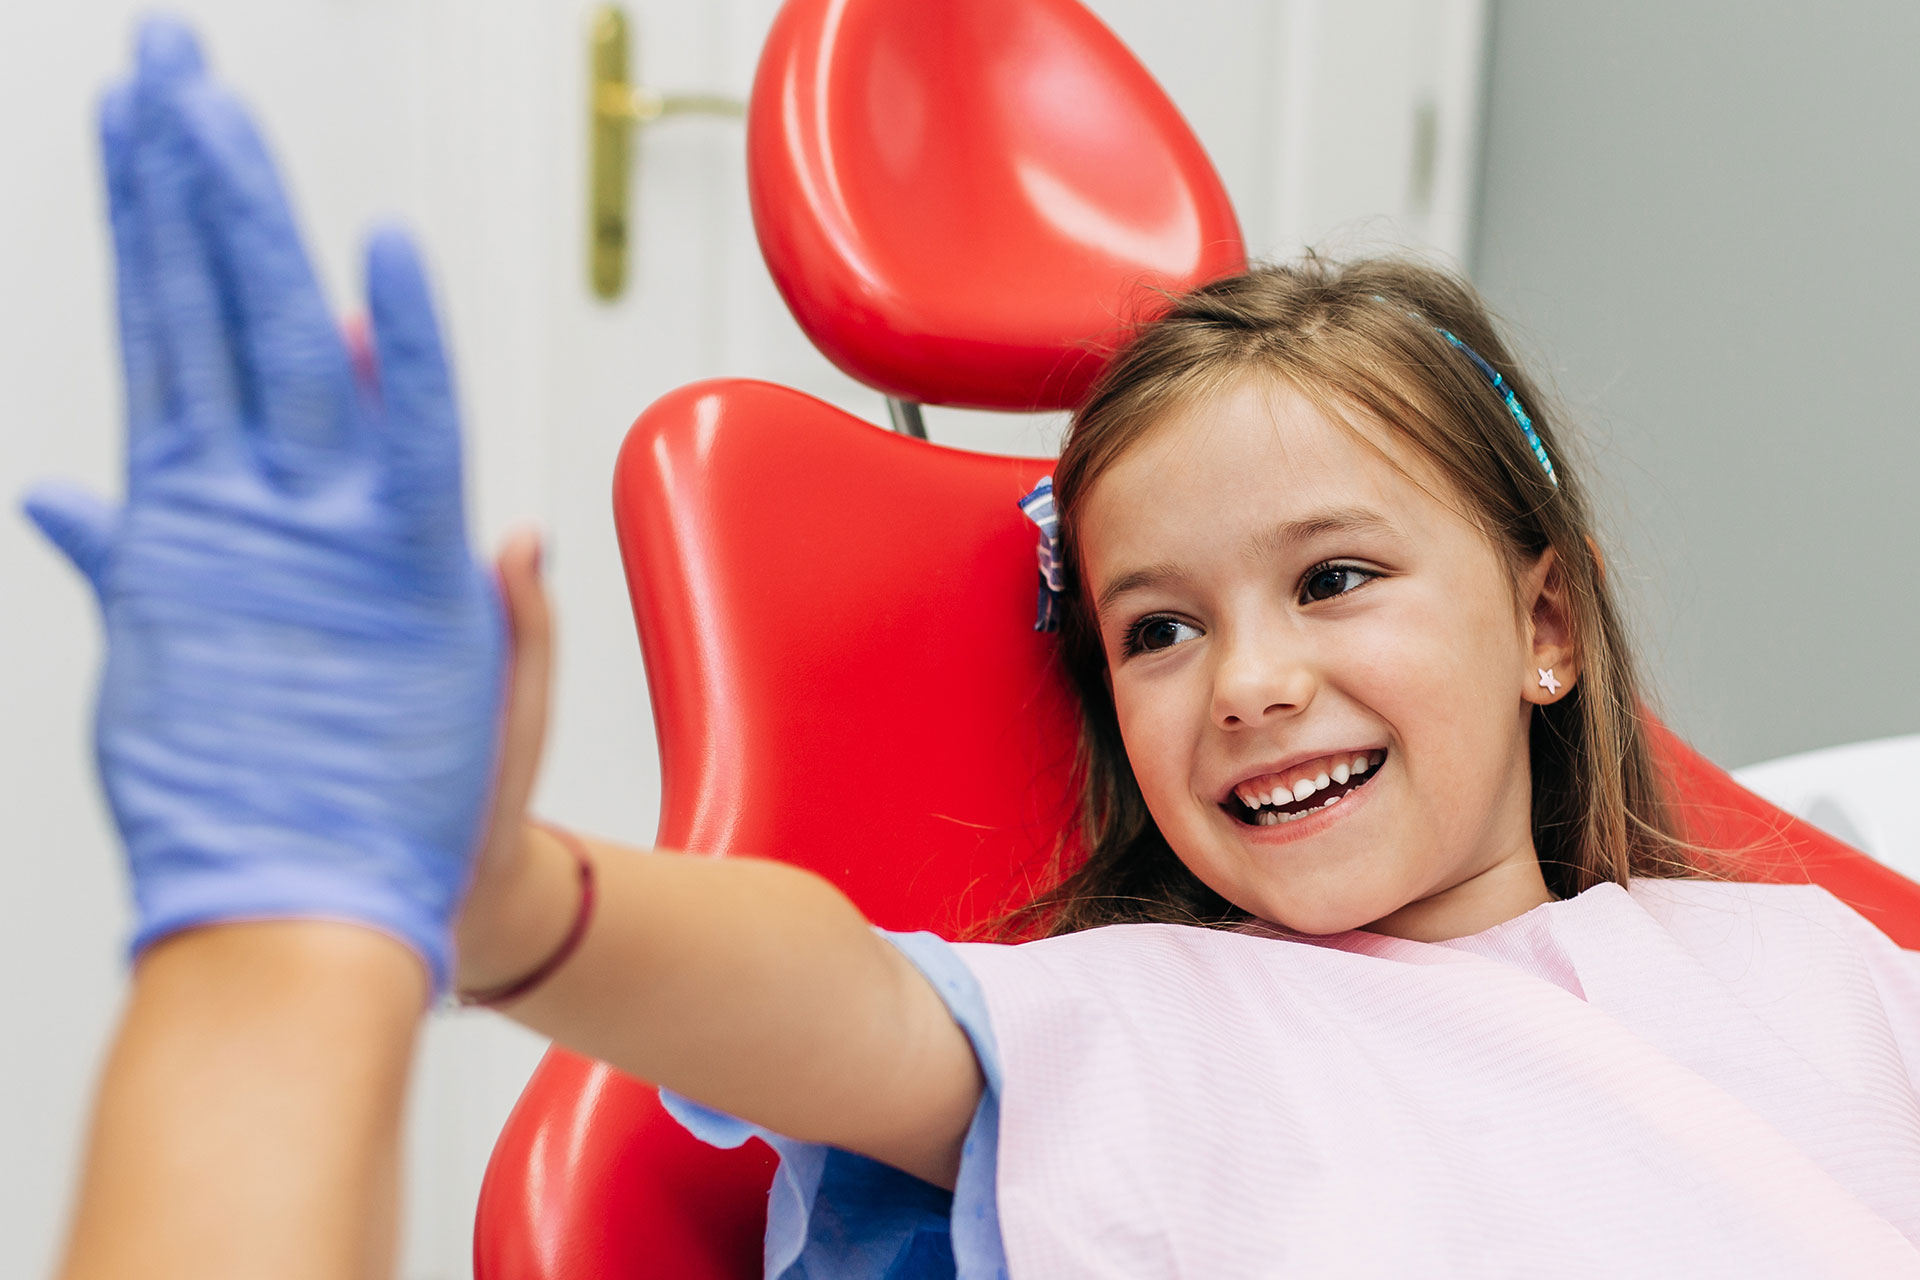 A young girl is giving a thumbs-up while wearing gloves and sitting in a dental chair.